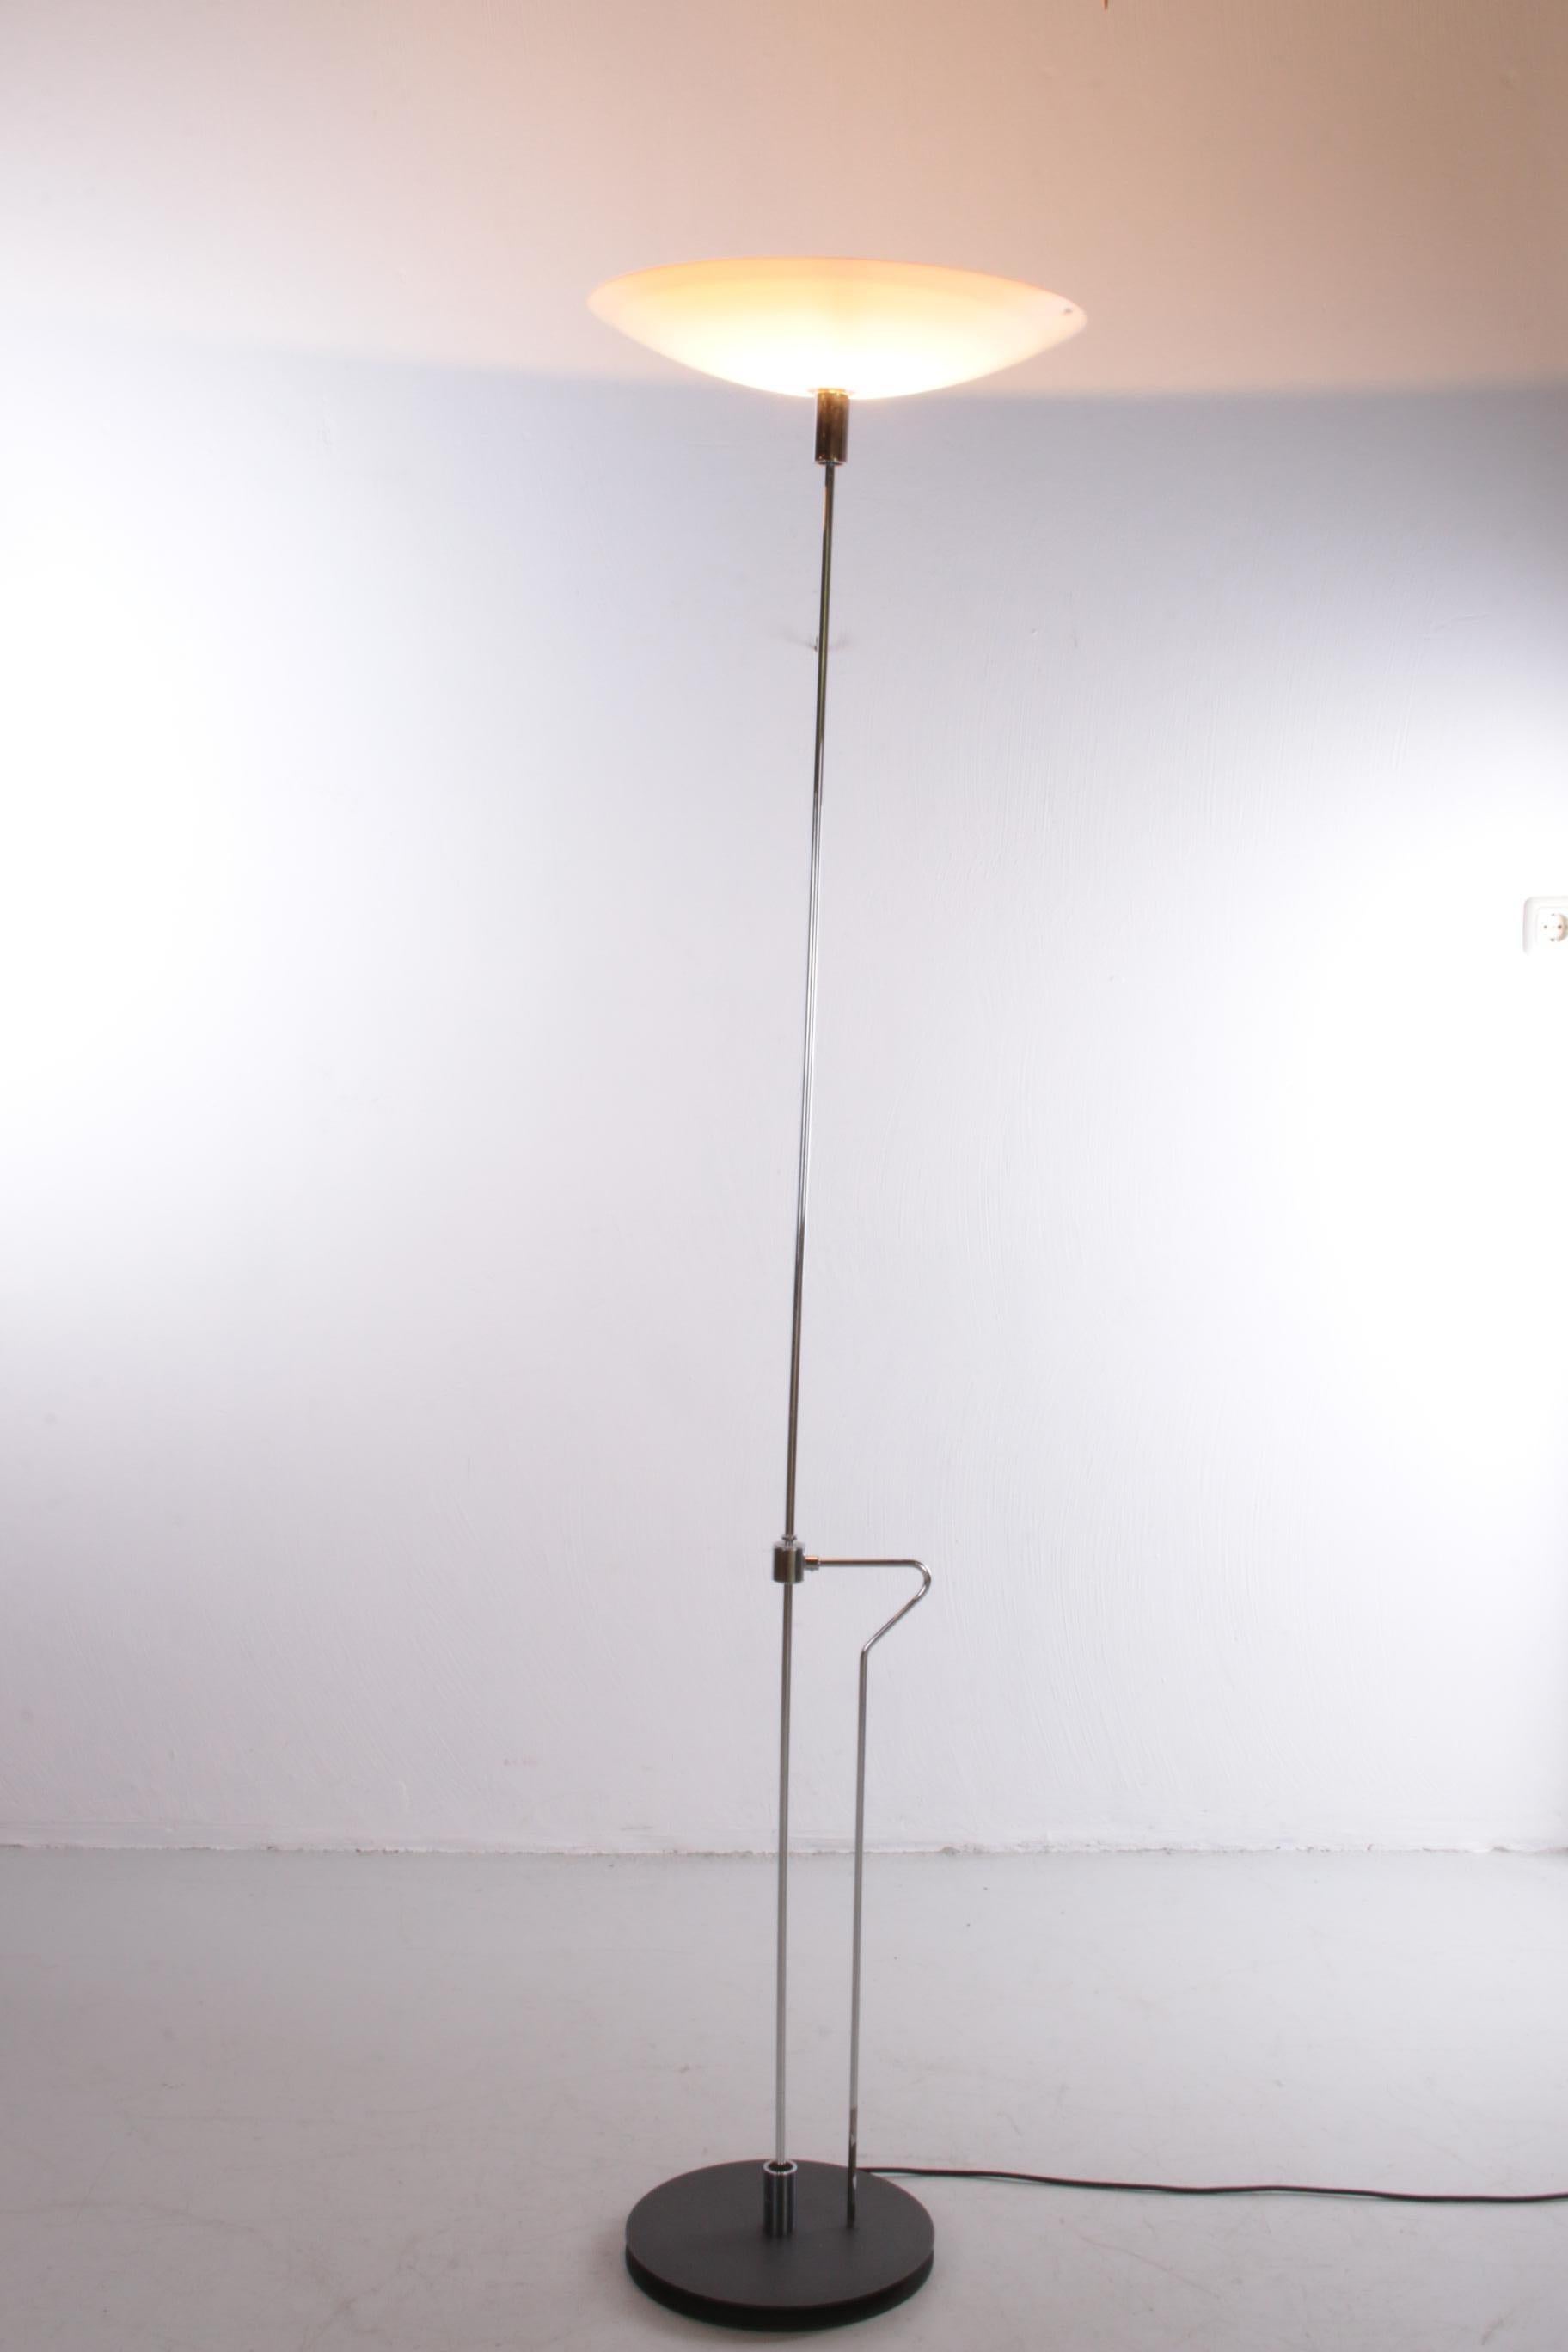 Afna 'floor lamp by VeArt ARtemide.

Design in Italy made in the 20th century.

A design by Jeannot Cerutti.

The shade is made of white frosted glass.